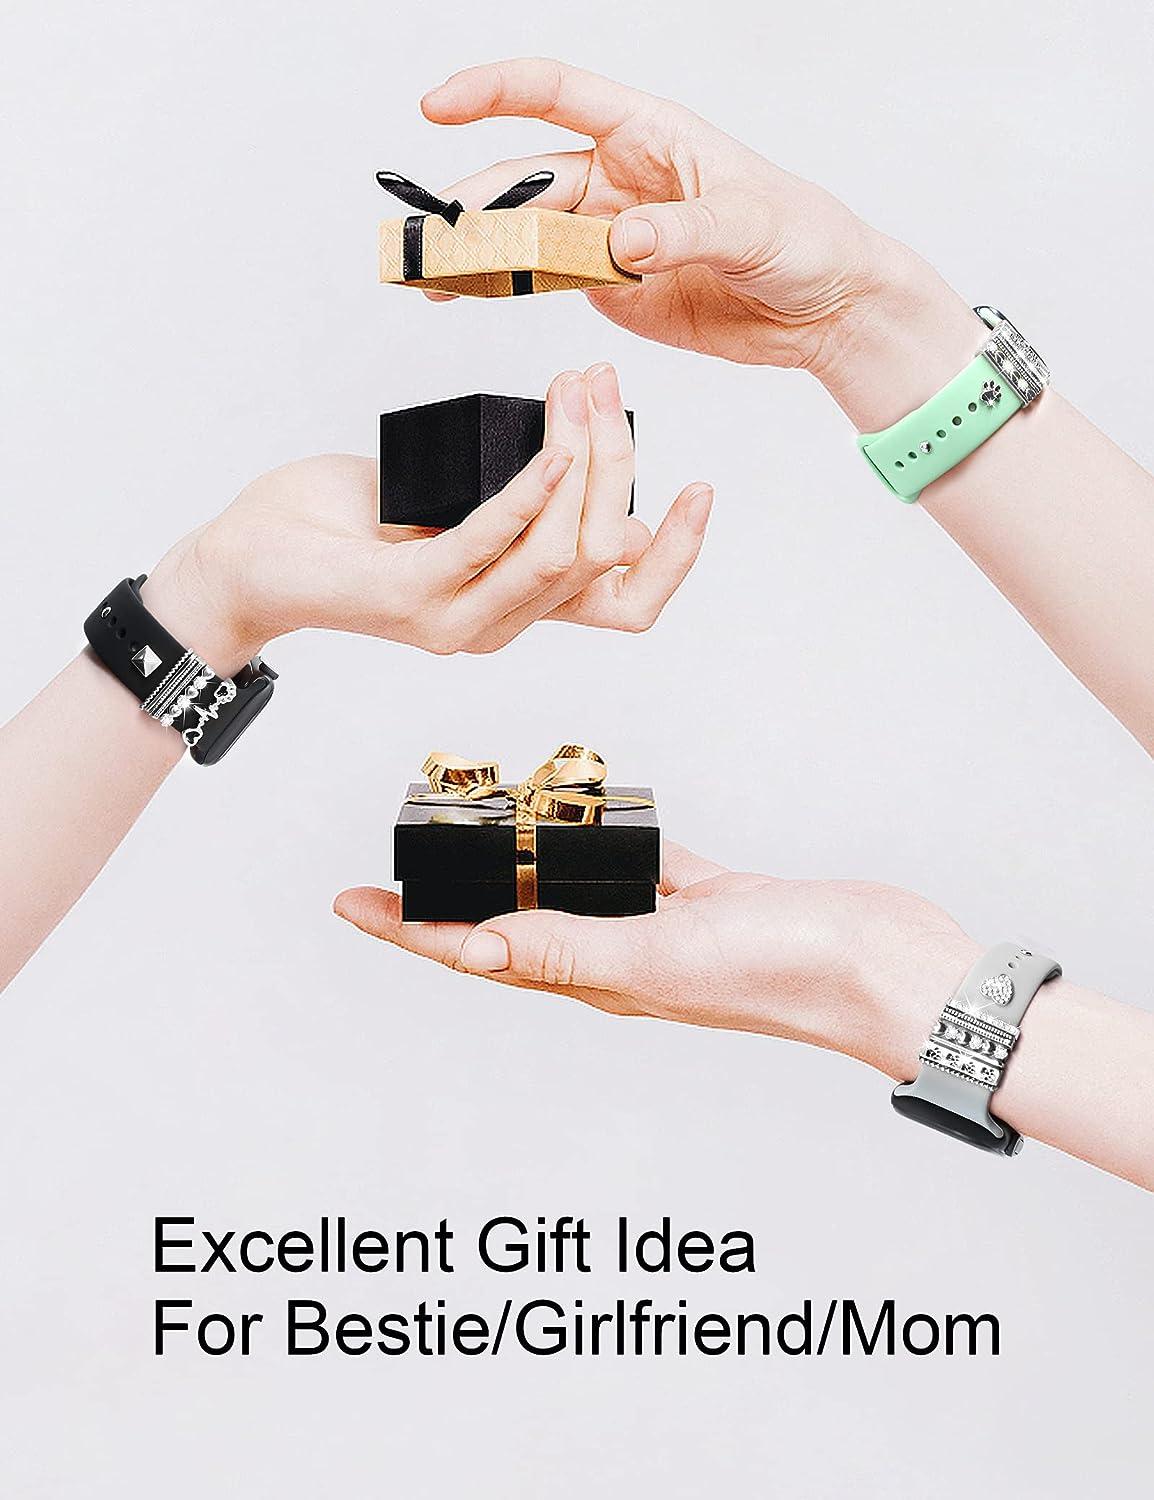 Cute Christmas Charm Watchband Compatible With Iwatch Series